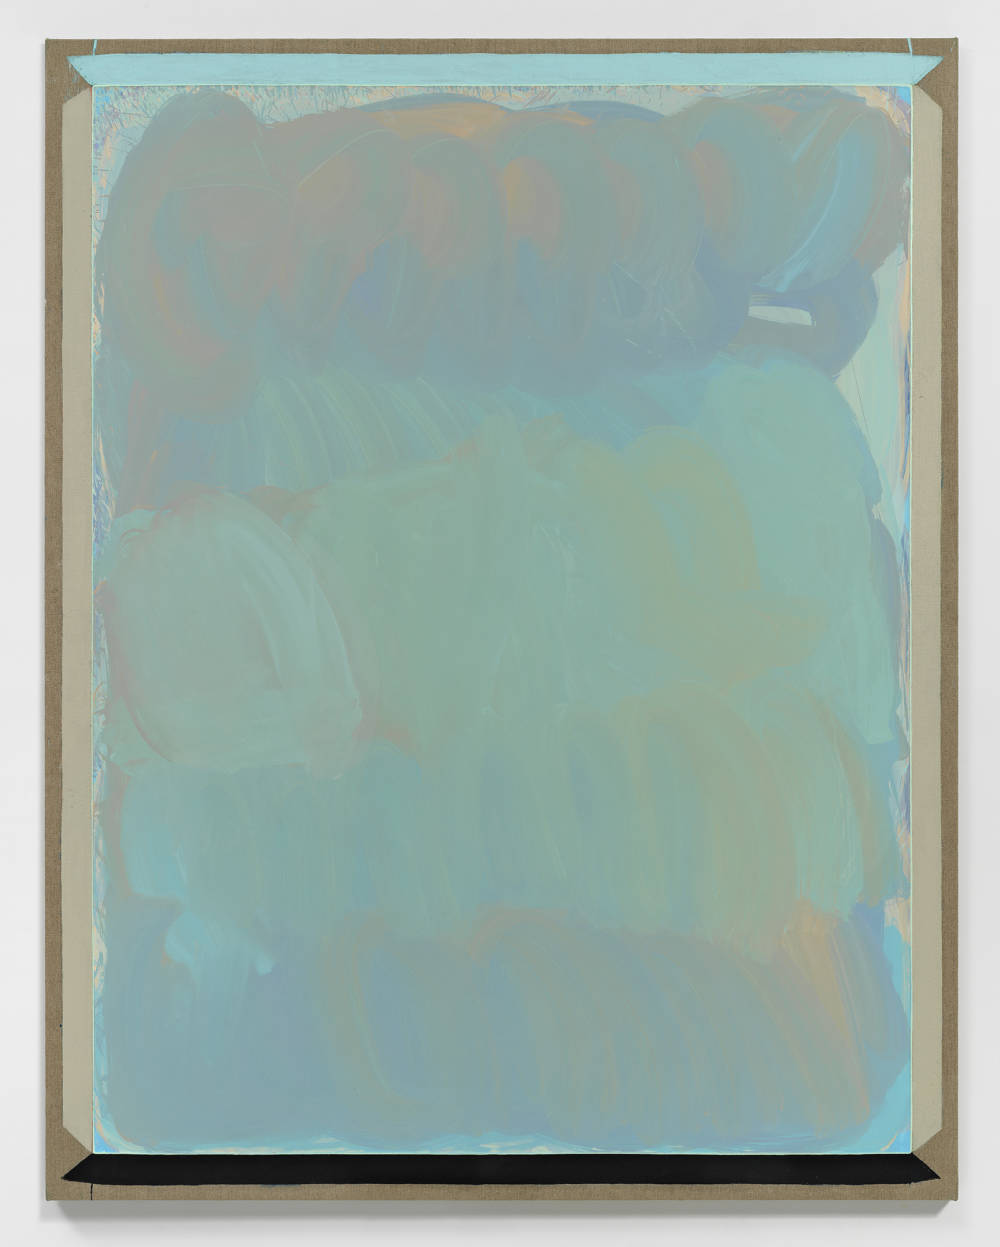 A large abstract painting with a washy surface and exposed linen around the edges.